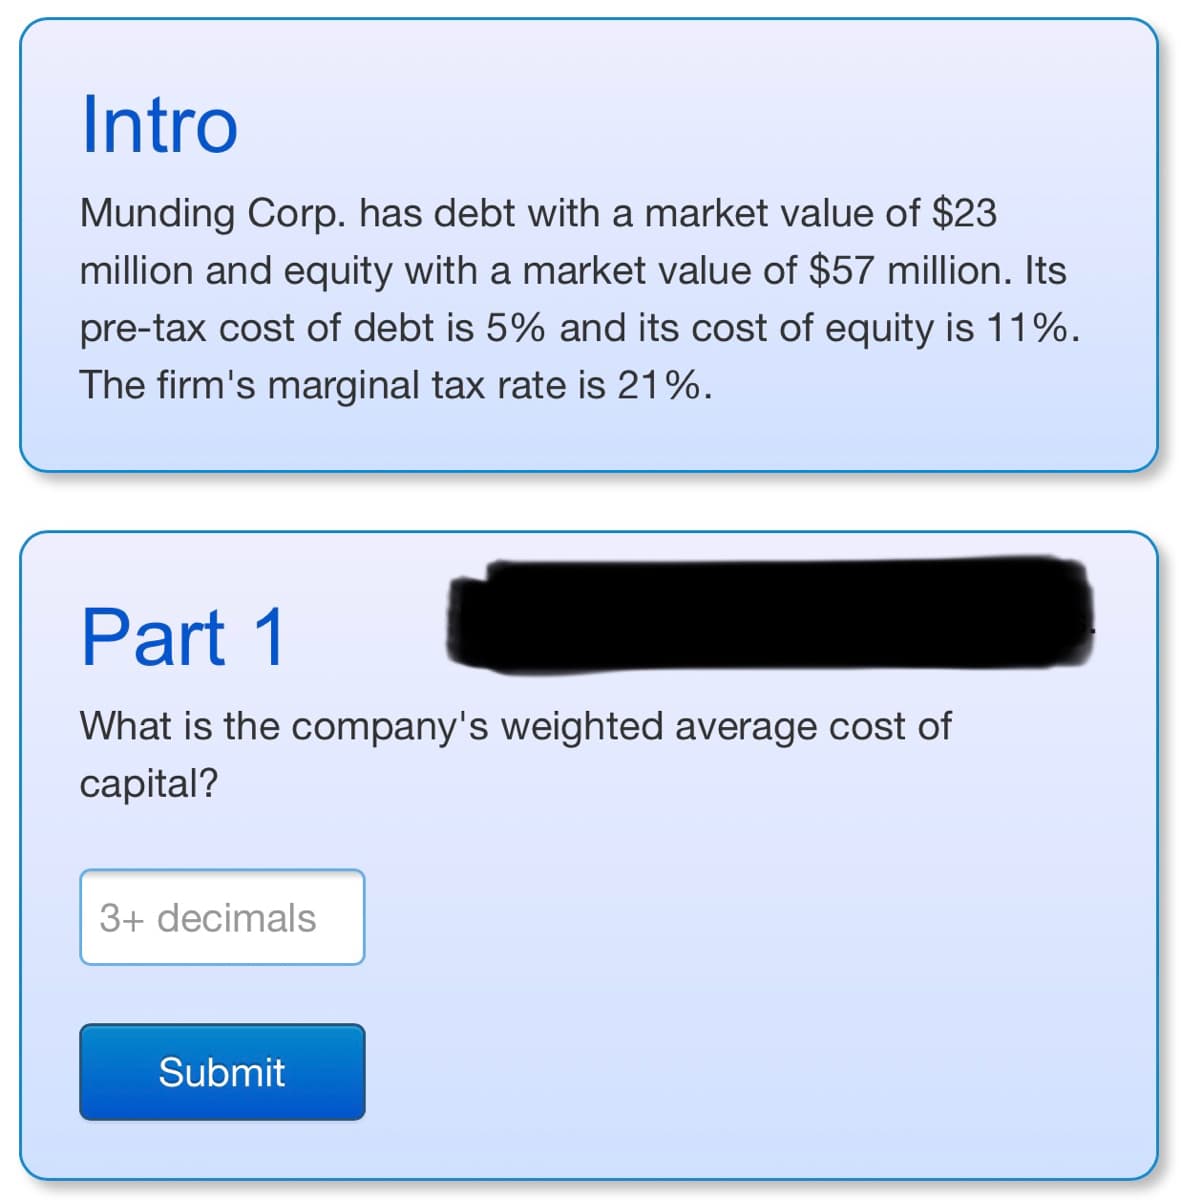 Intro
Munding Corp. has debt with a market value of $23
million and equity with a market value of $57 million. Its
pre-tax cost of debt is 5% and its cost of equity is 11%.
The firm's marginal tax rate is 21%.
Part 1
What is the company's weighted average cost of
capital?
3+ decimals
Submit